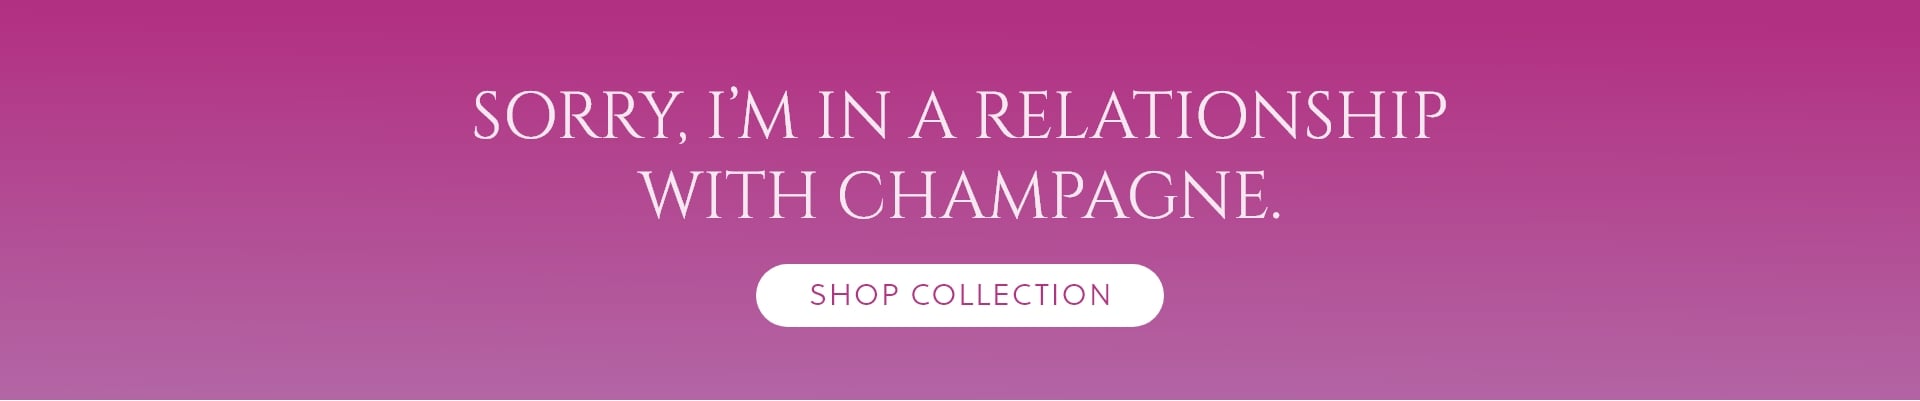 in_a_relationship_with_champagne_desktop